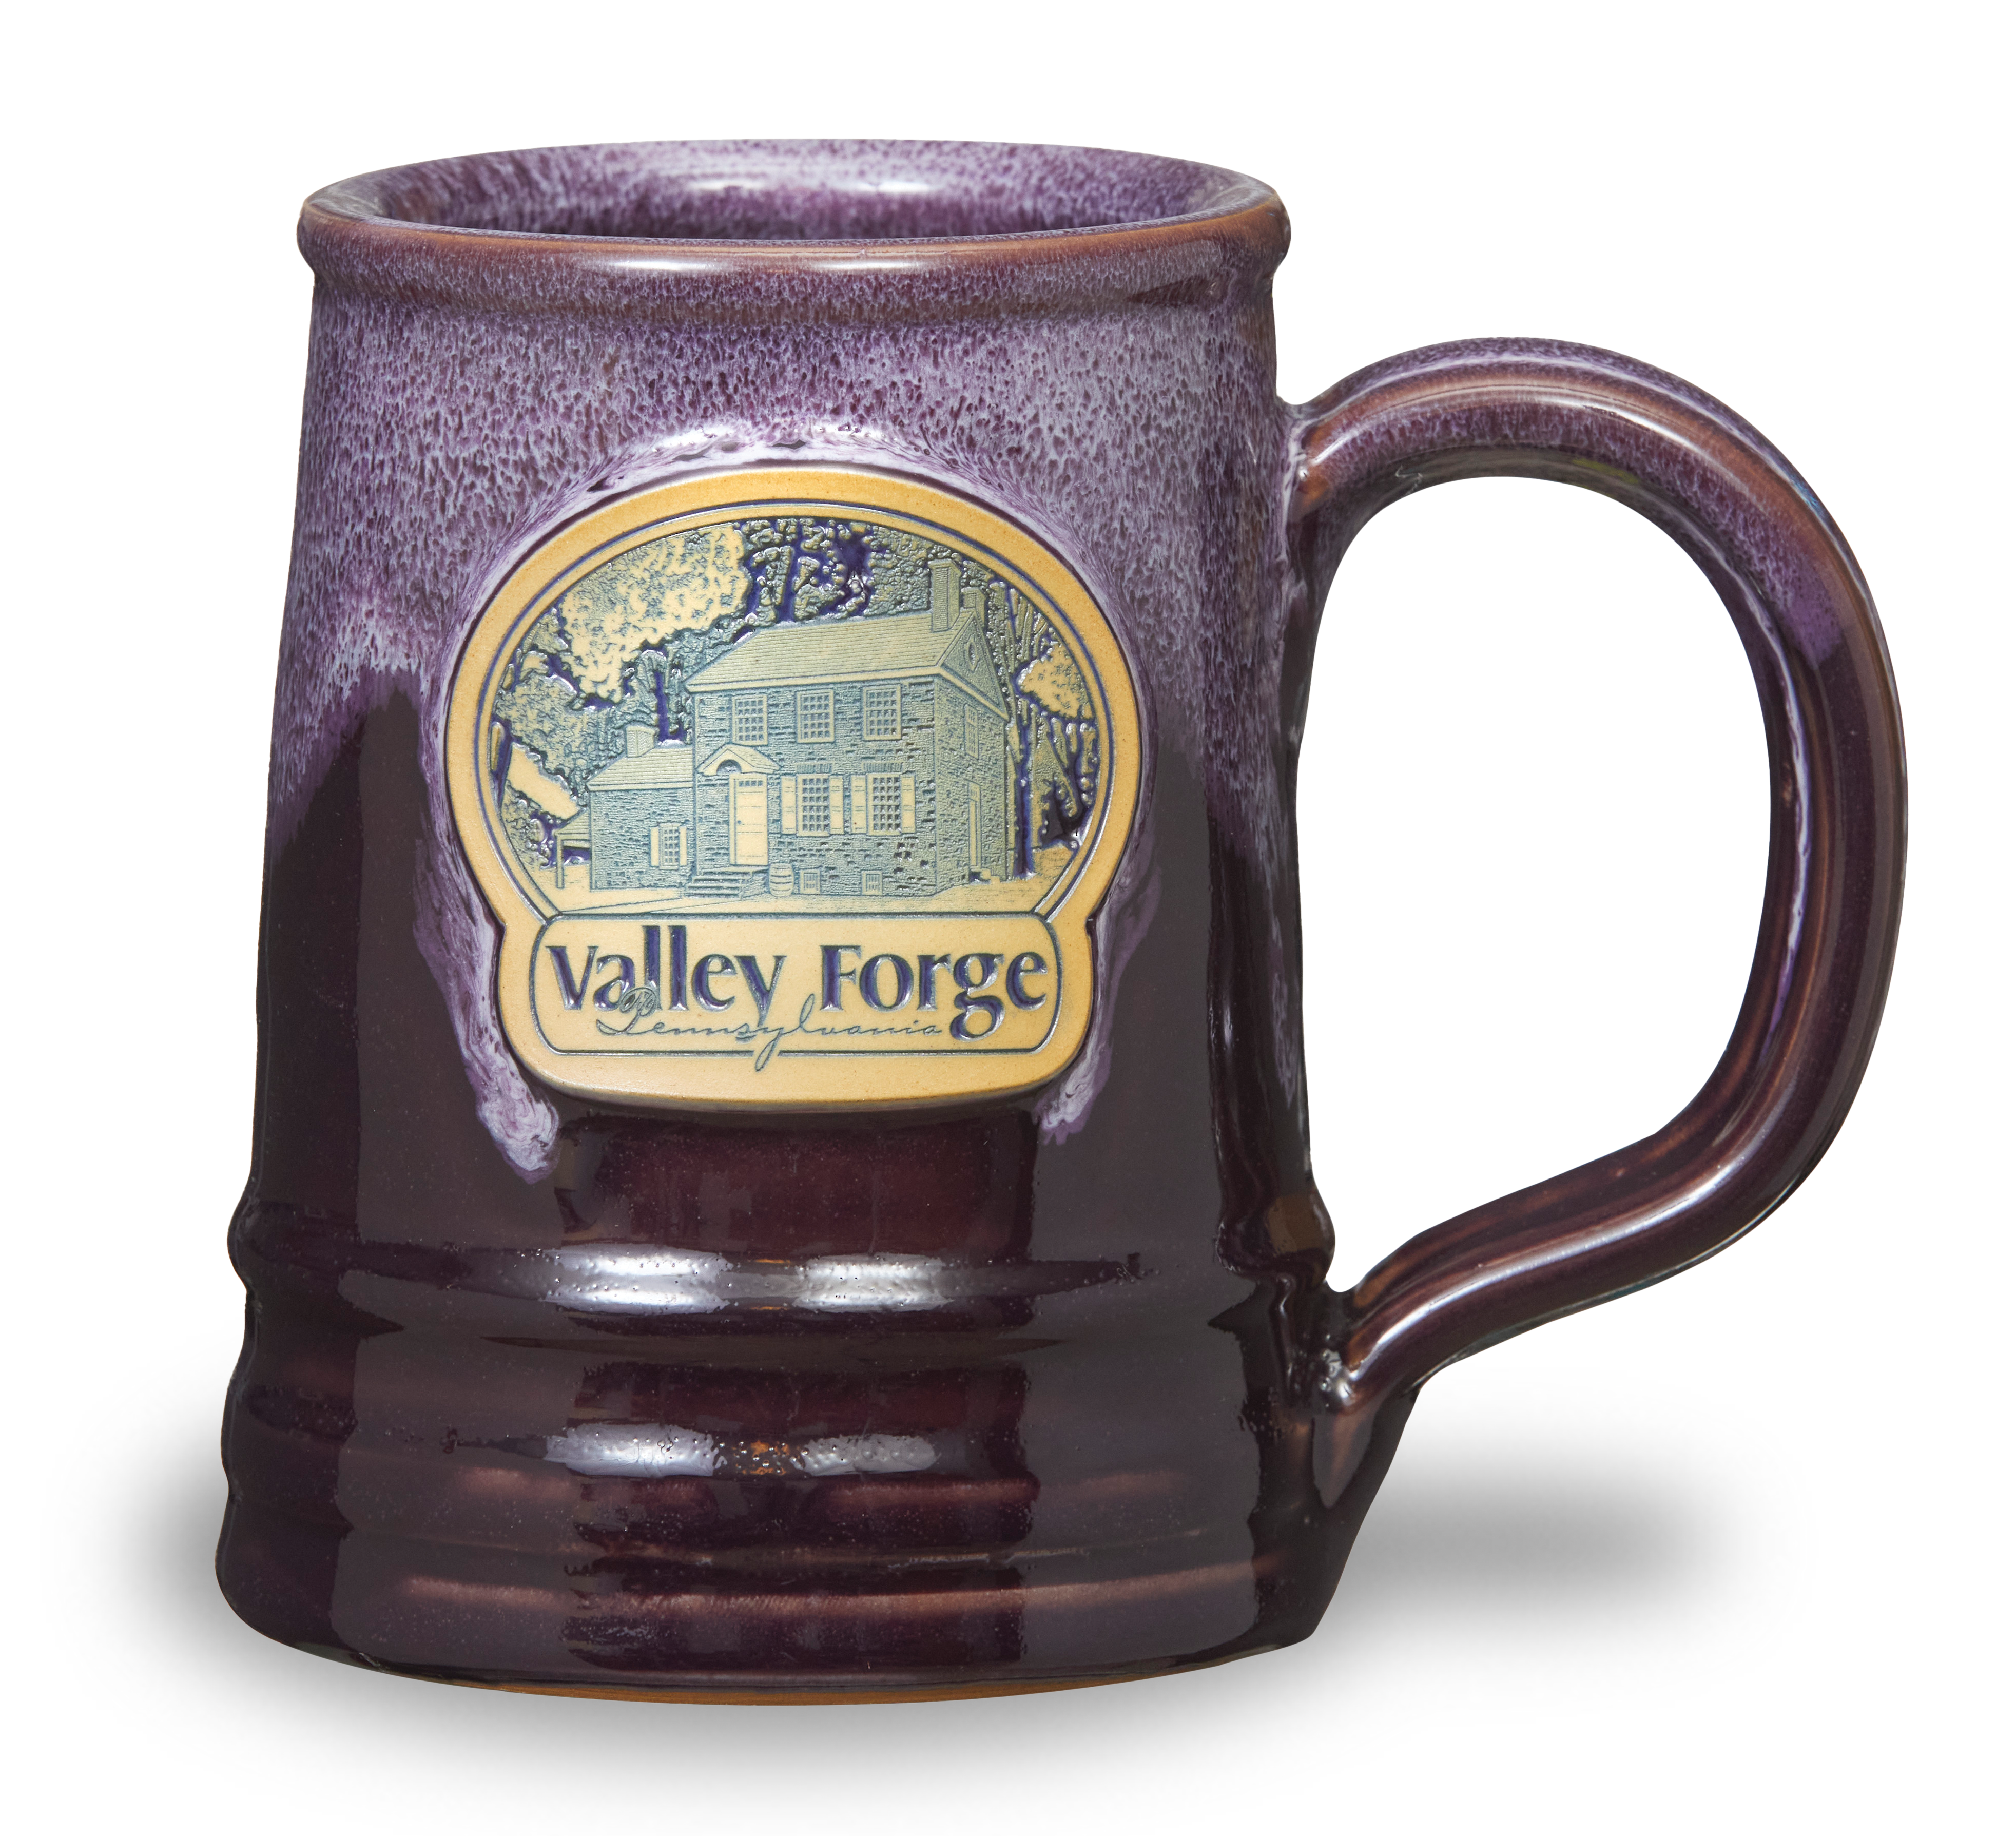 Valley Forge <a class='qbutton' href='https://deneenpottery.com/mug-styles/norg-tankard/'>View More Details</a>